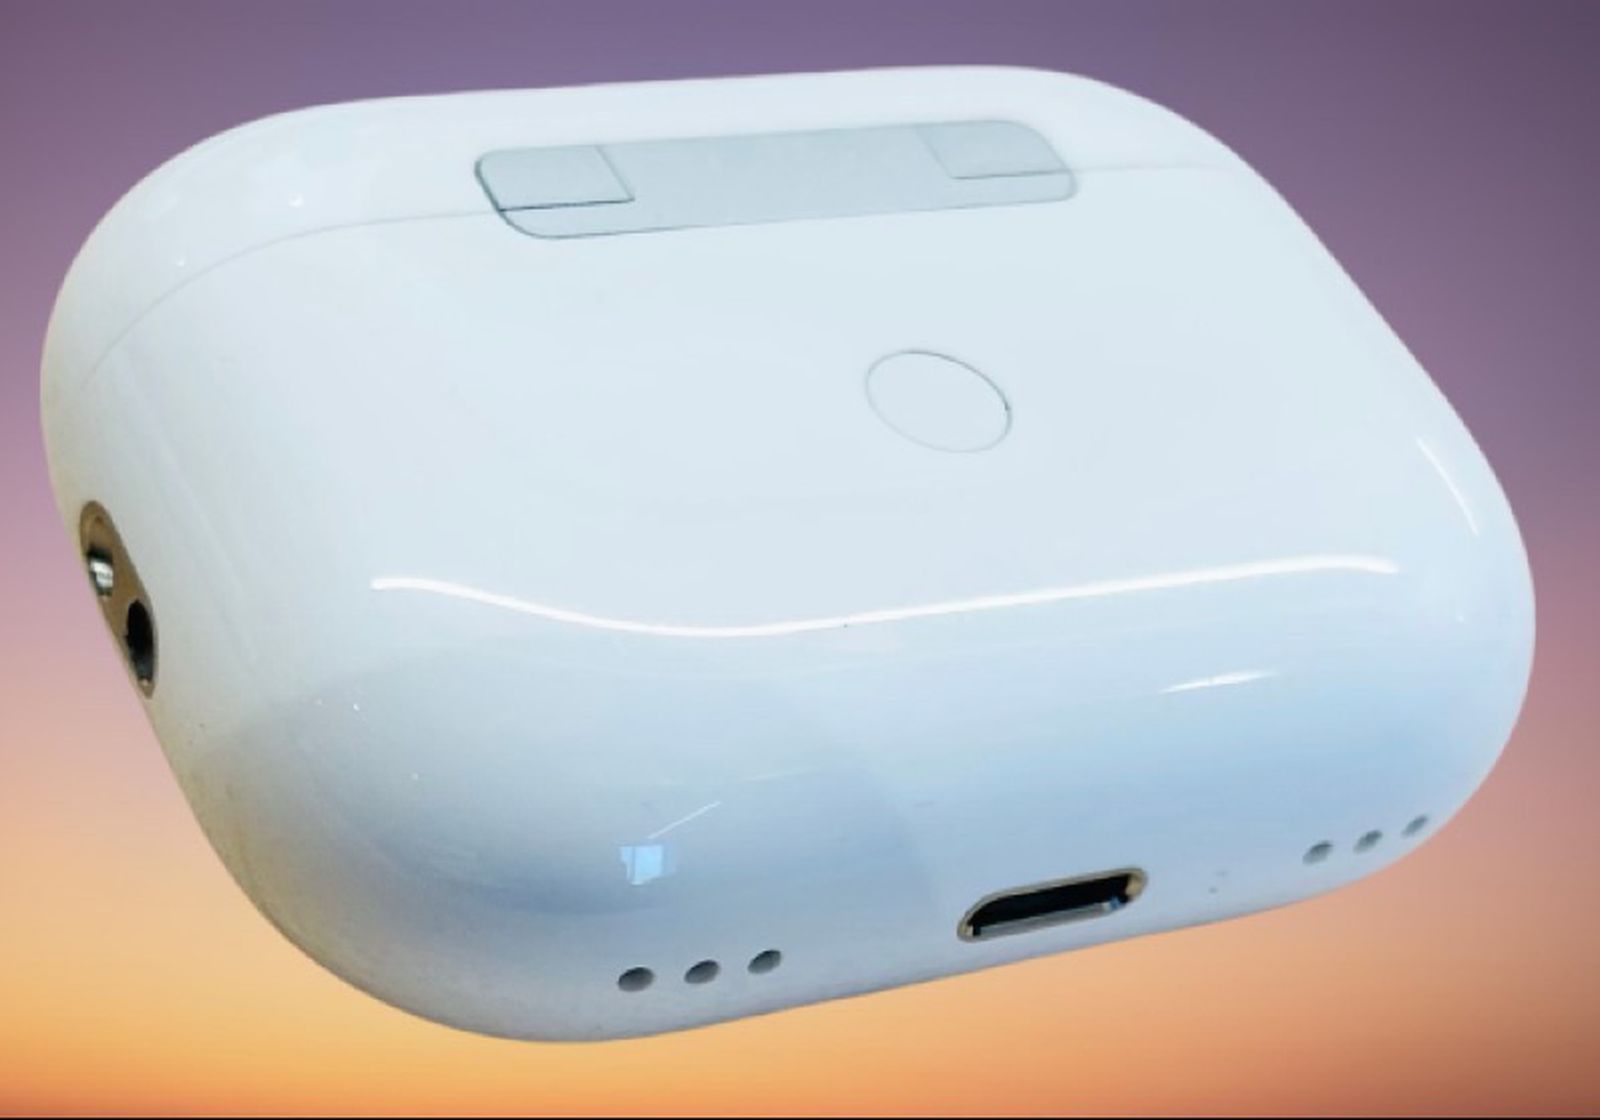 Photos Depict Alleged AirPods Pro 2 With Same Design, Case With 'Find My'  Speaker Holes and Strap Attachment - MacRumors